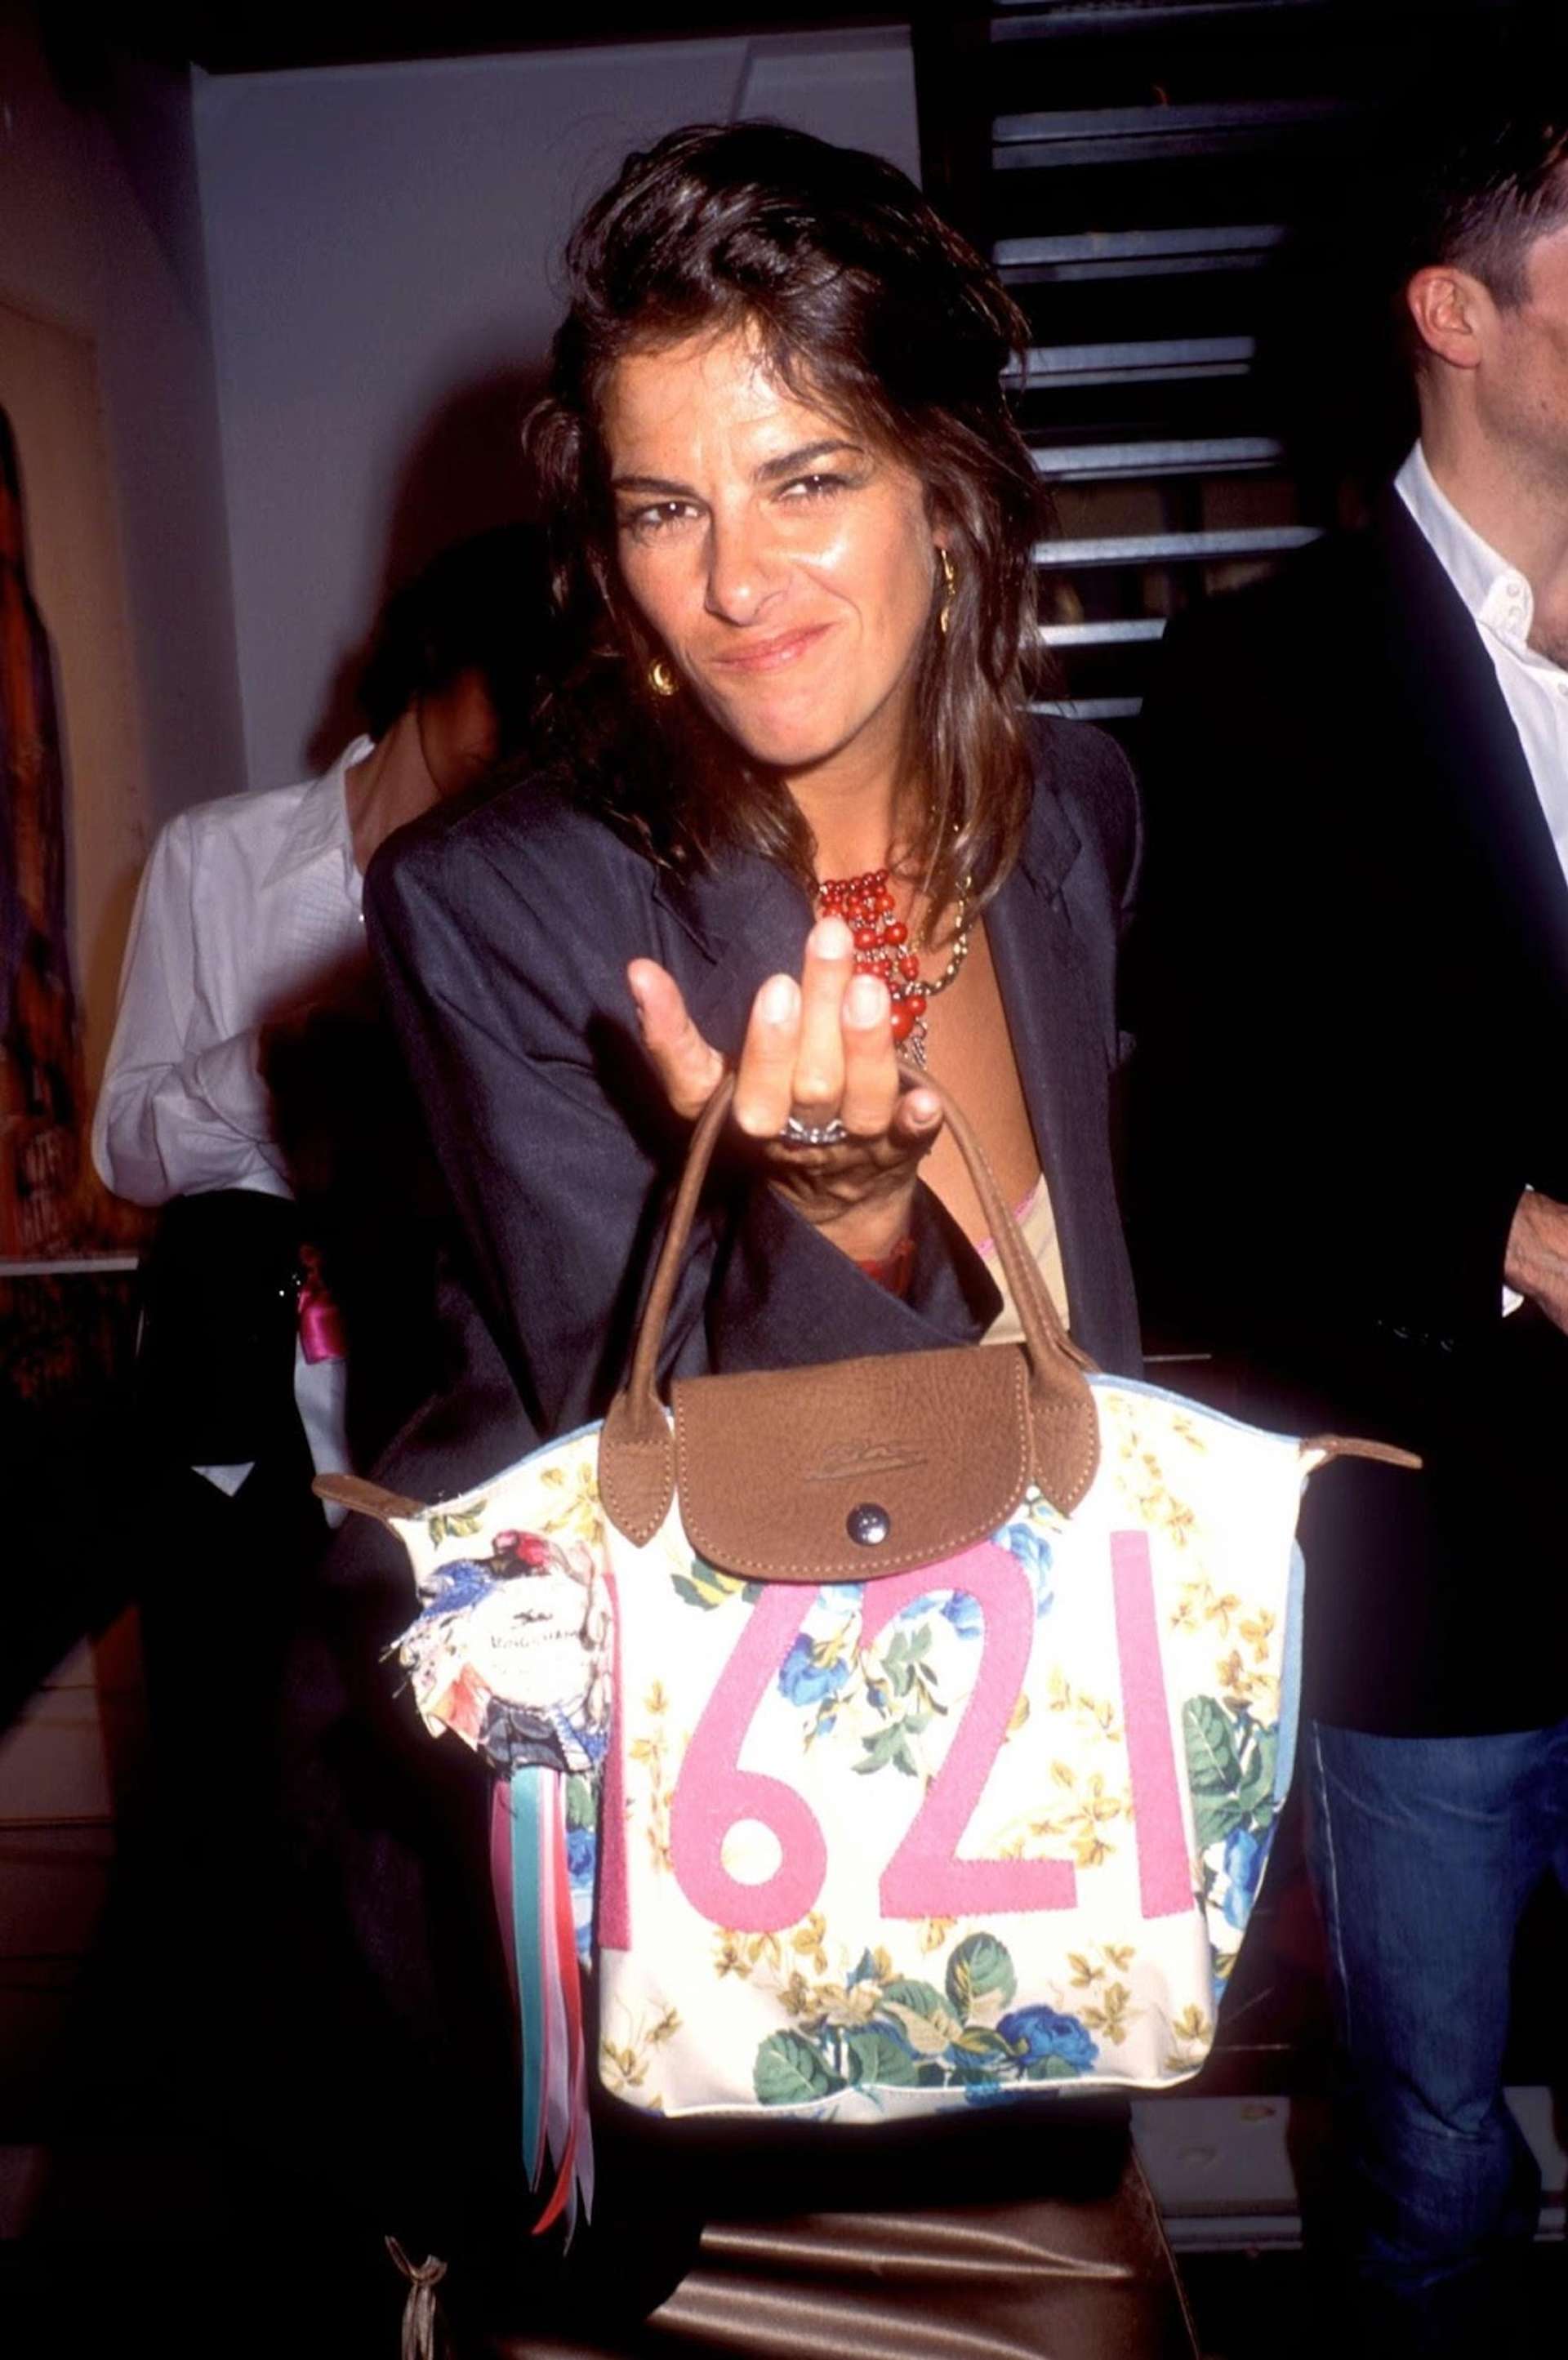 An image of artist Tracey Emin holding one of the Longchamp bags she designed in 2004.